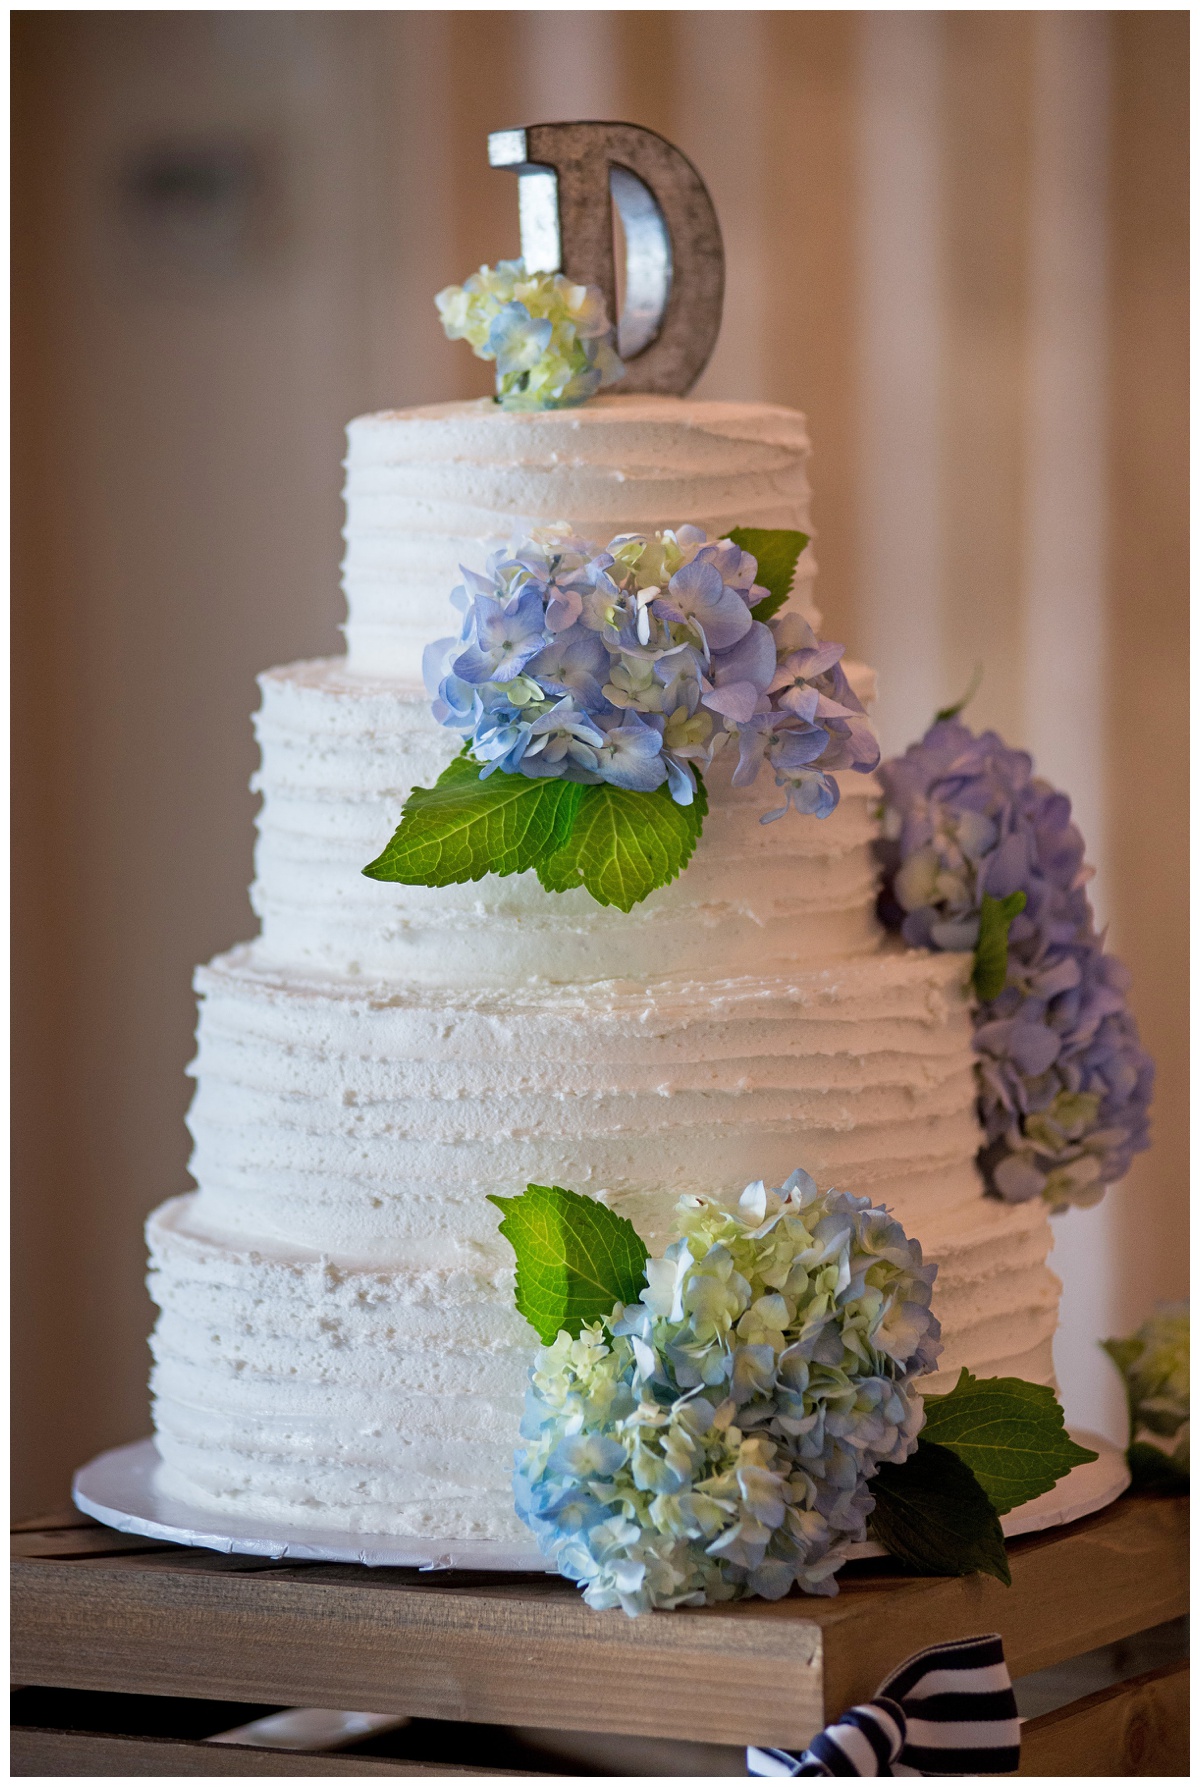 tiered wedding cake - white with blue hydrangea flowers and customized cake topper - rustic - chesapeake bay wedding on maryland eastern shore in the summer in june at the oaks waterfront inn - perfectly charming wedding inspiration | My Eastern Shore Wedding